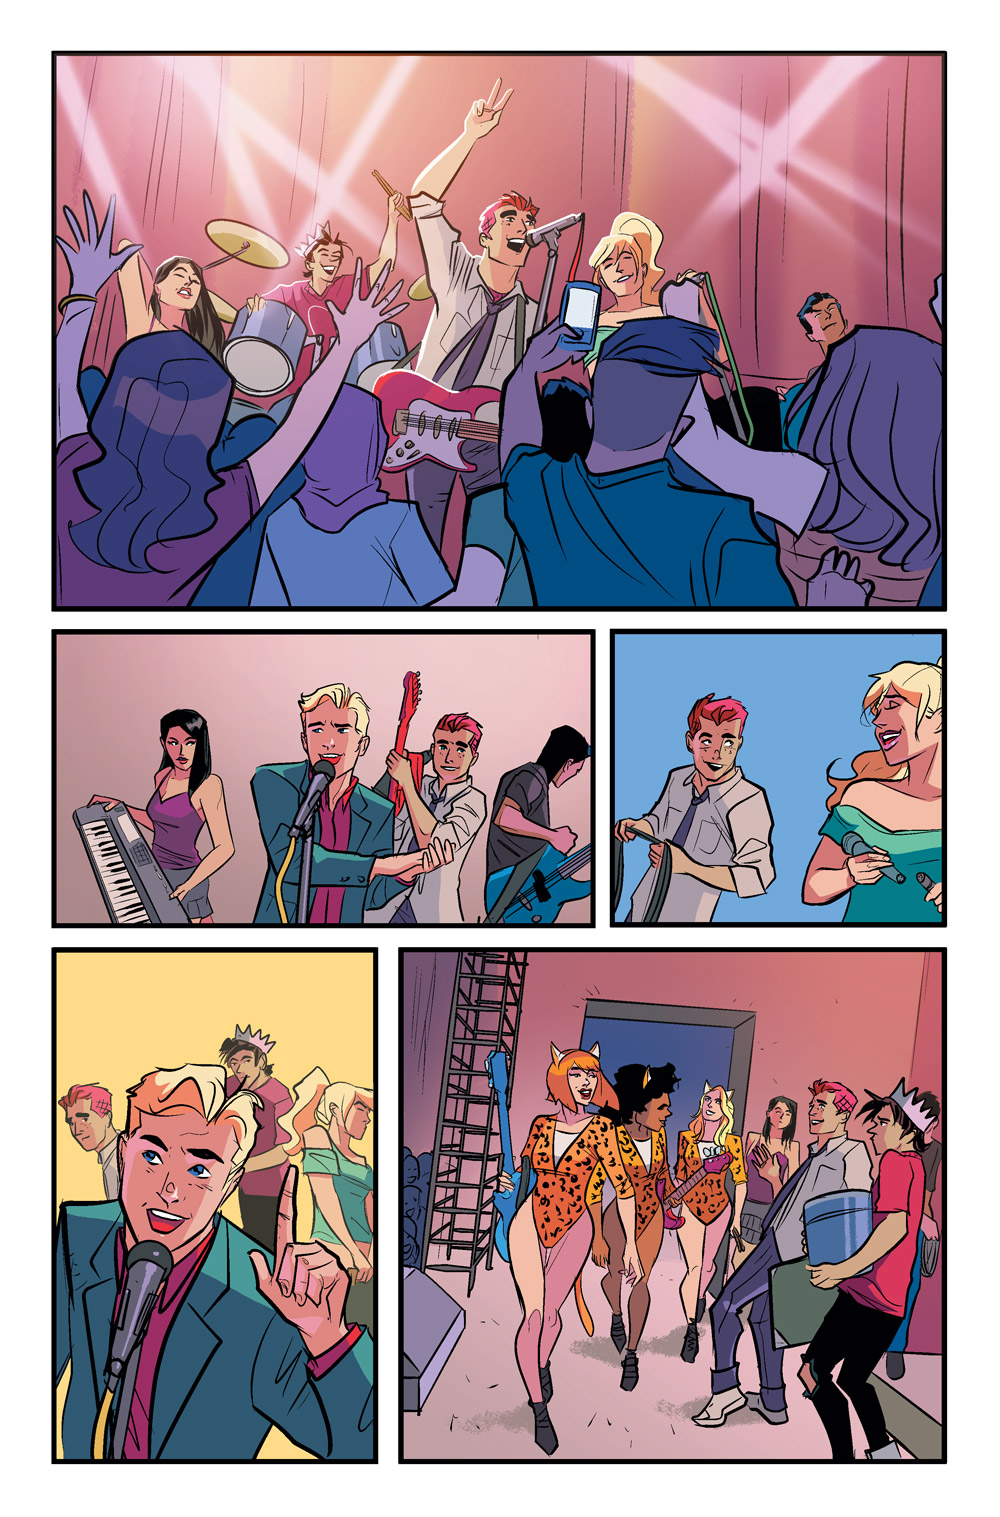 The Archies #7